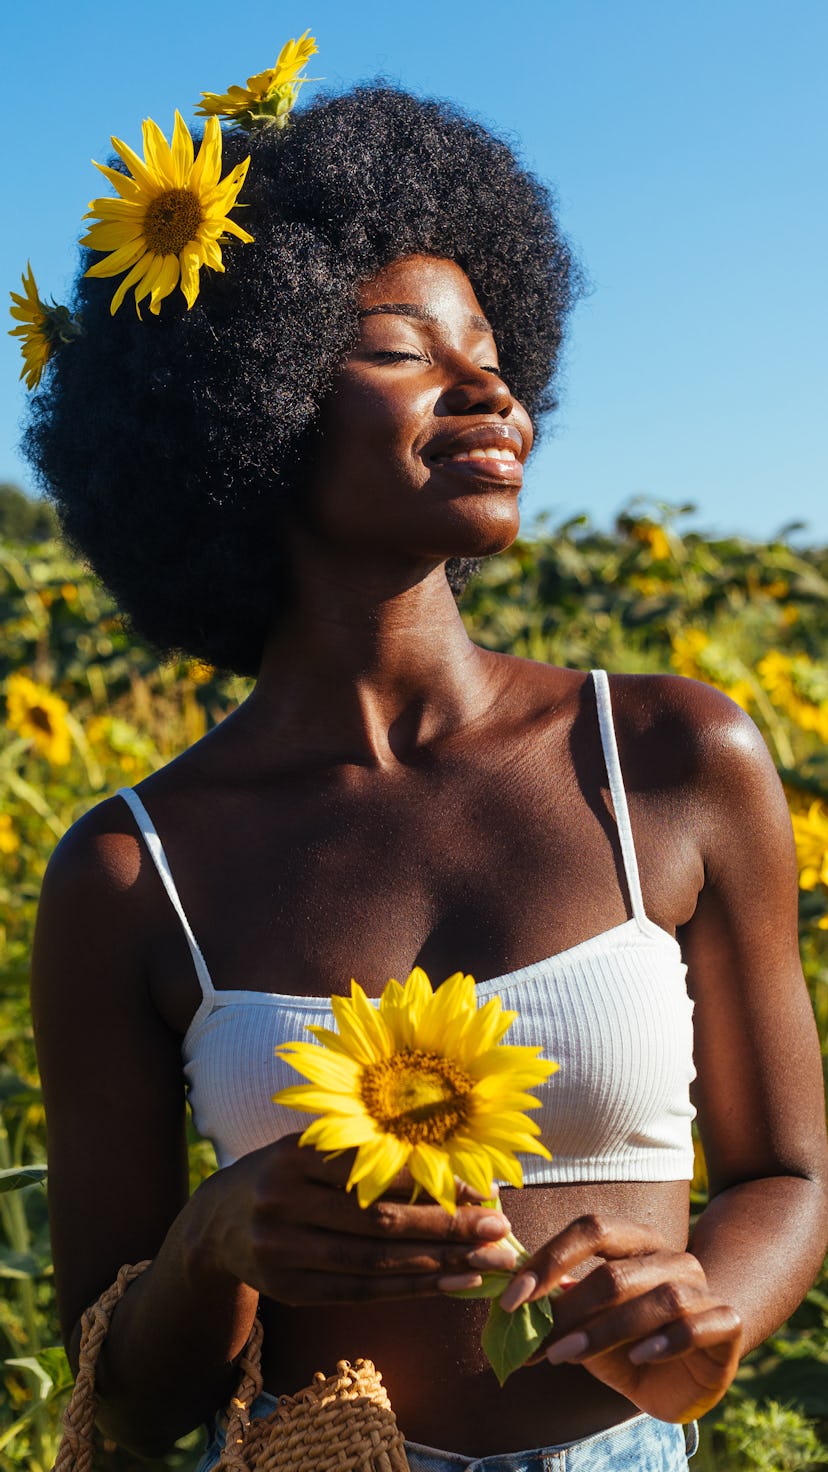 Woman with sunflowers in her hair smiling in a sunflower field. Taurus season 2022 begins April 19 a...